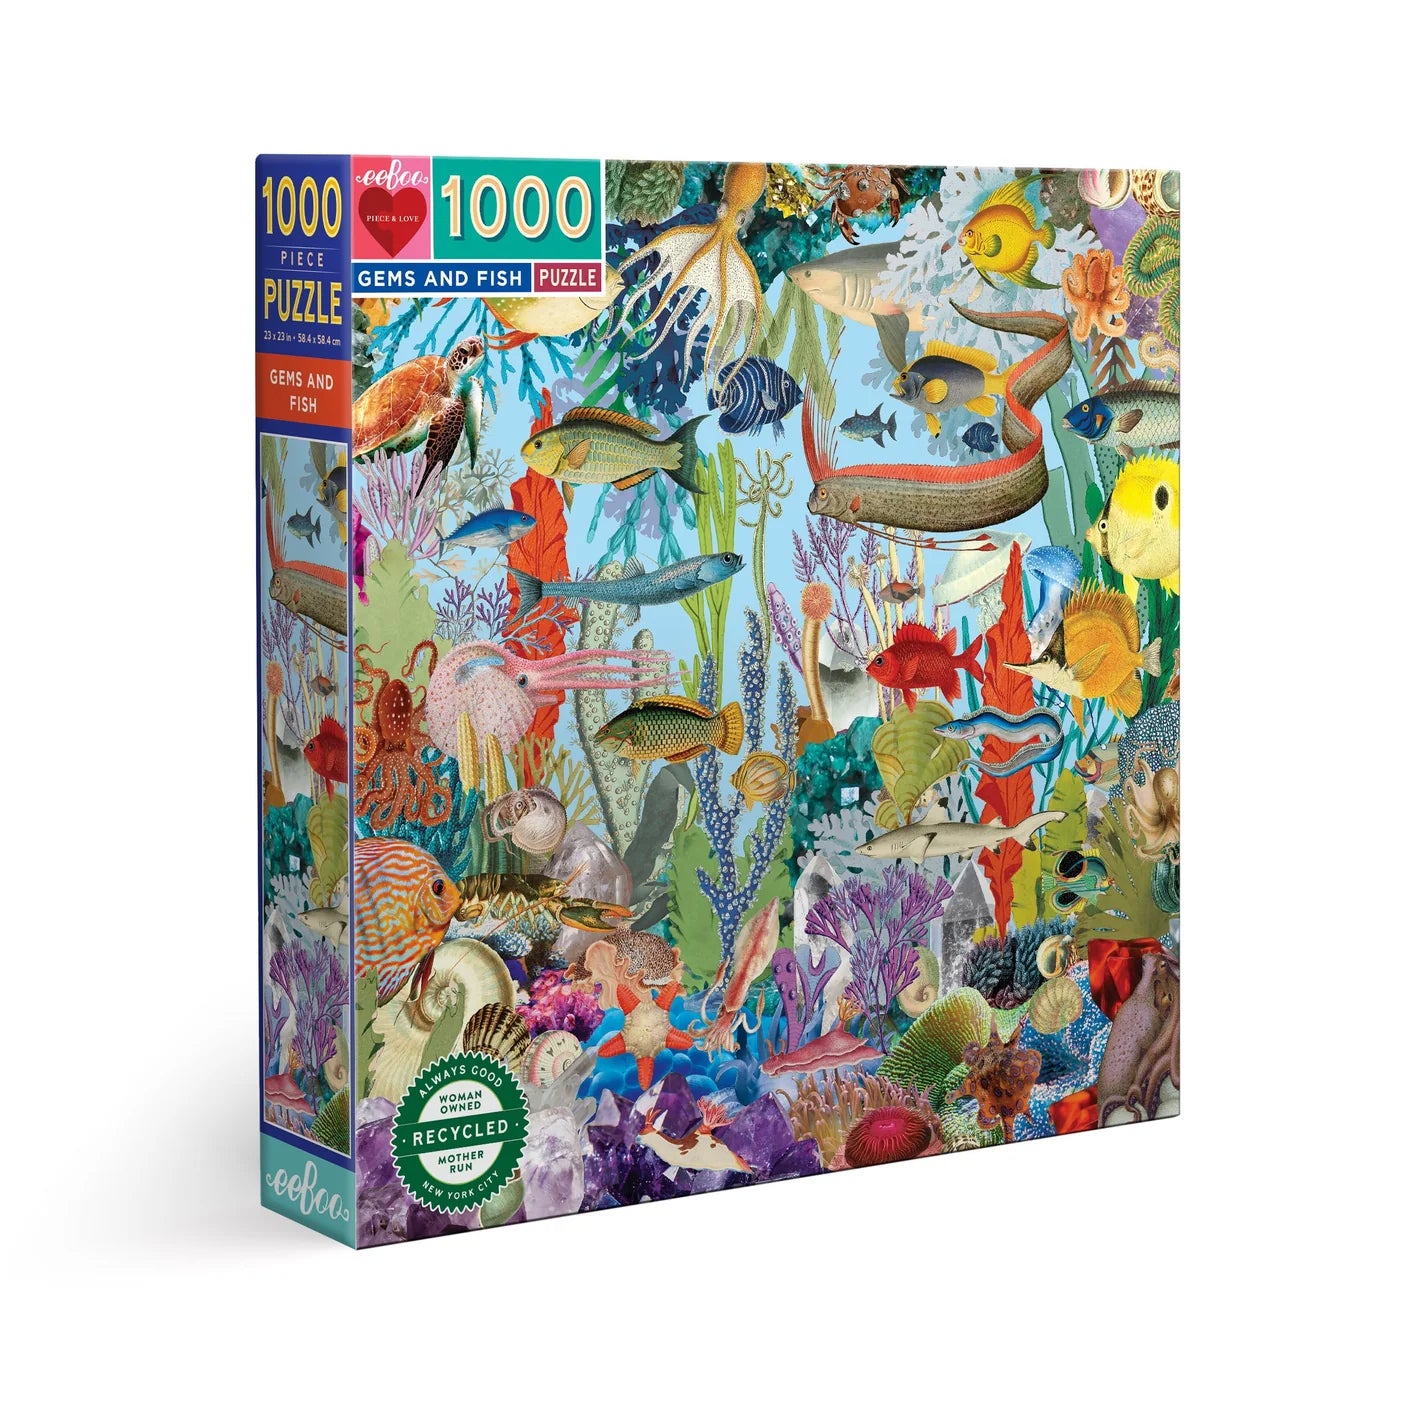 Gems and Fish - 1,000 Piece Puzzle